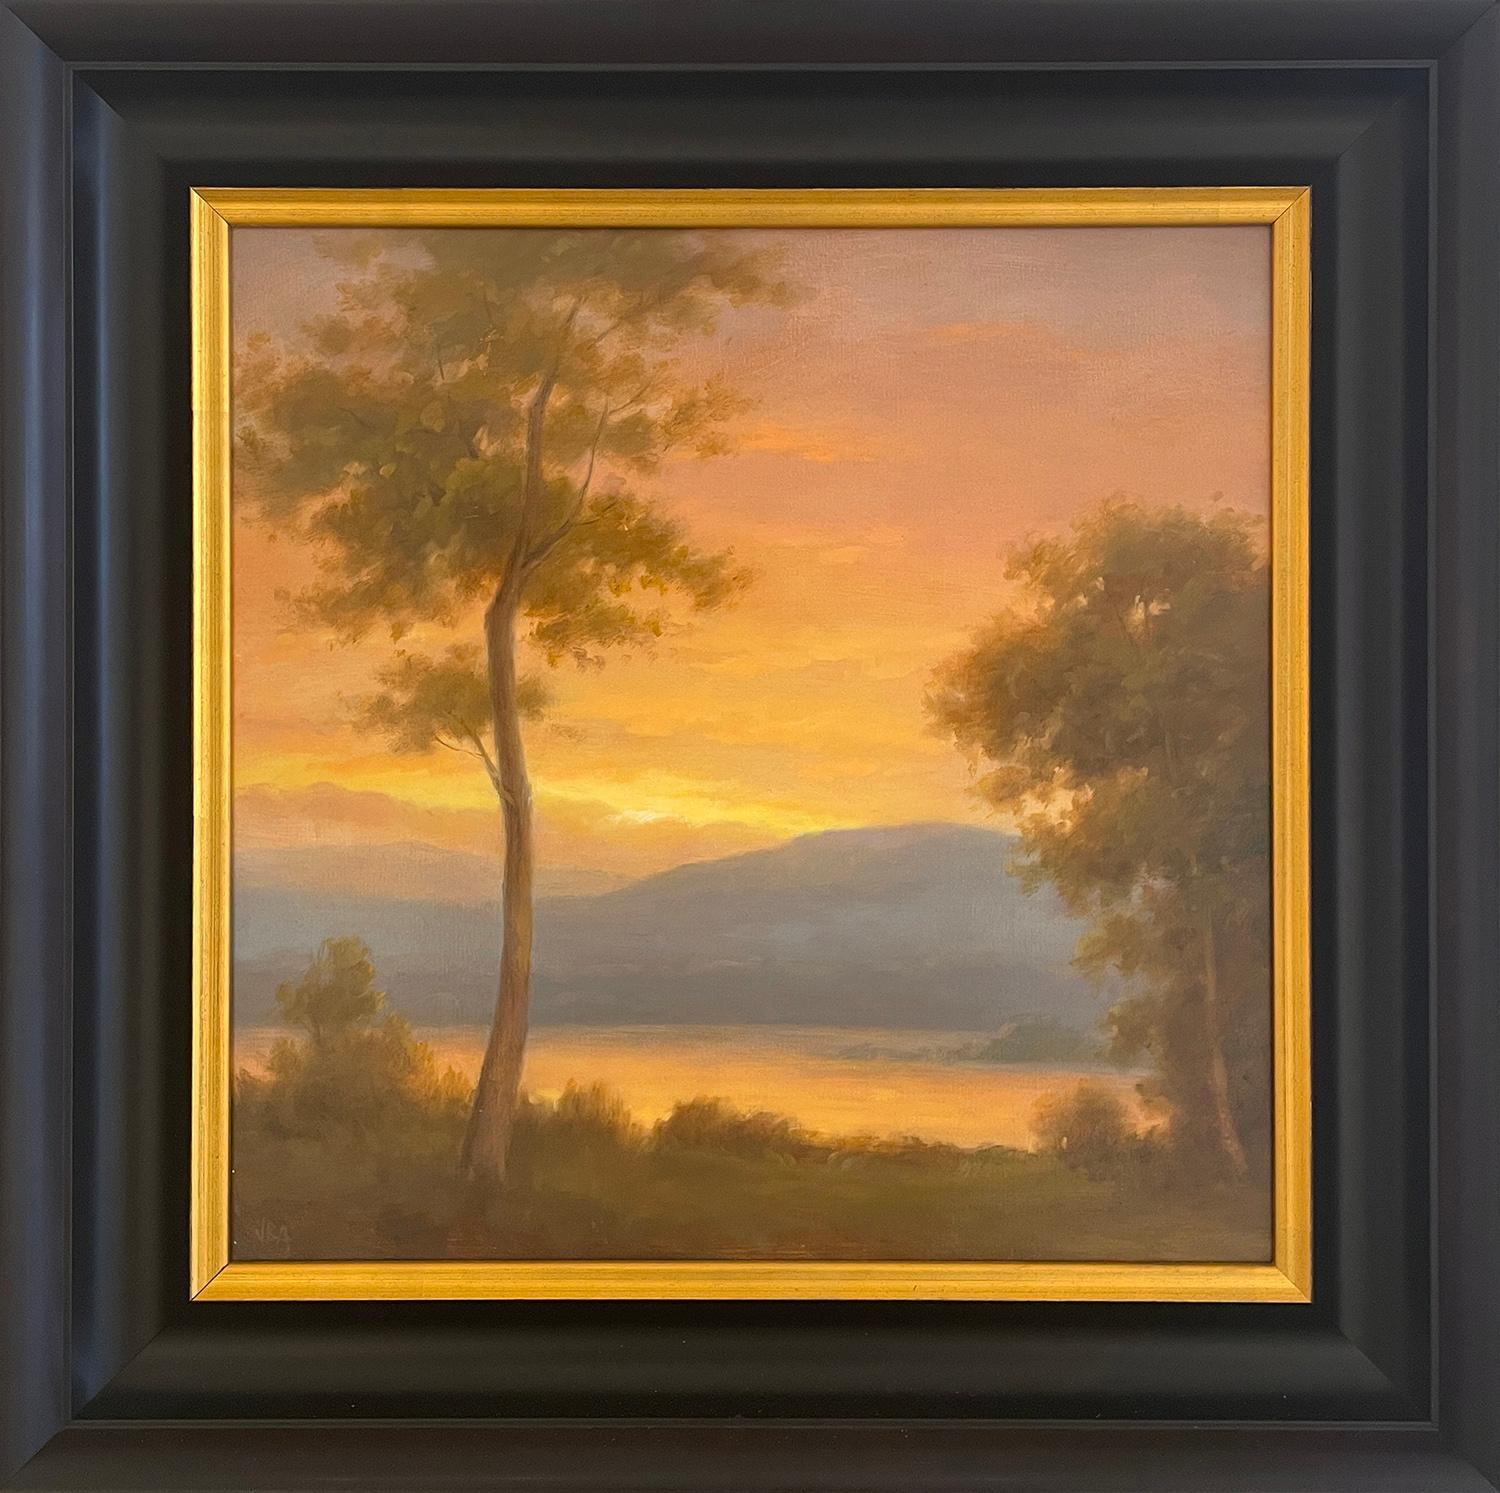 Traditional landscape painting in the style of the Hudson River School painted by Jane Bloodgood-Abrams
"Sunset on the River", made in 2024
Landscape painting of a vibrant sunset against blue mountains and a calm river valley 
16" X 16" image size /